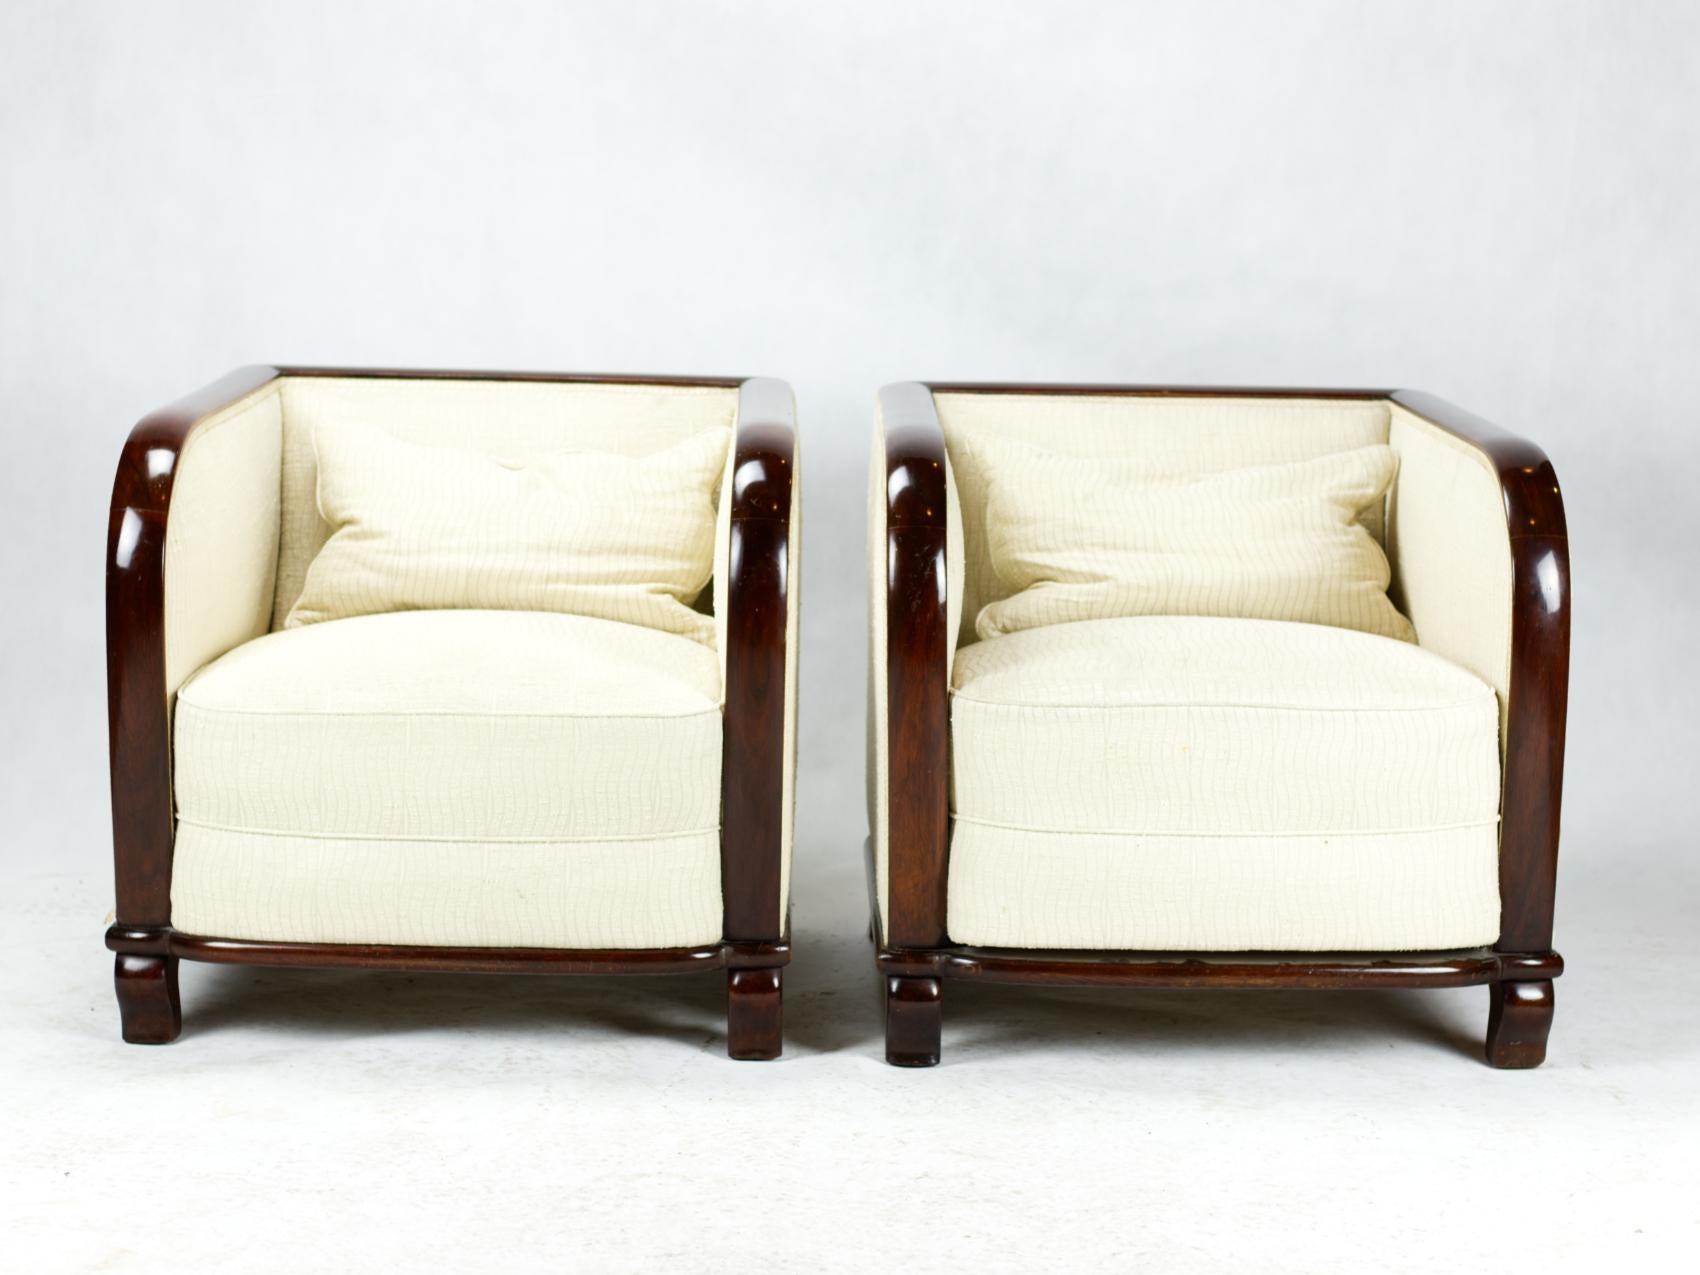 Pair of walnut Art Deco armchairs, circa 1930. The chairs have been completely renovated and reupholstered in the past, but since then they have been used.
The chairs are in very good condition in construction.